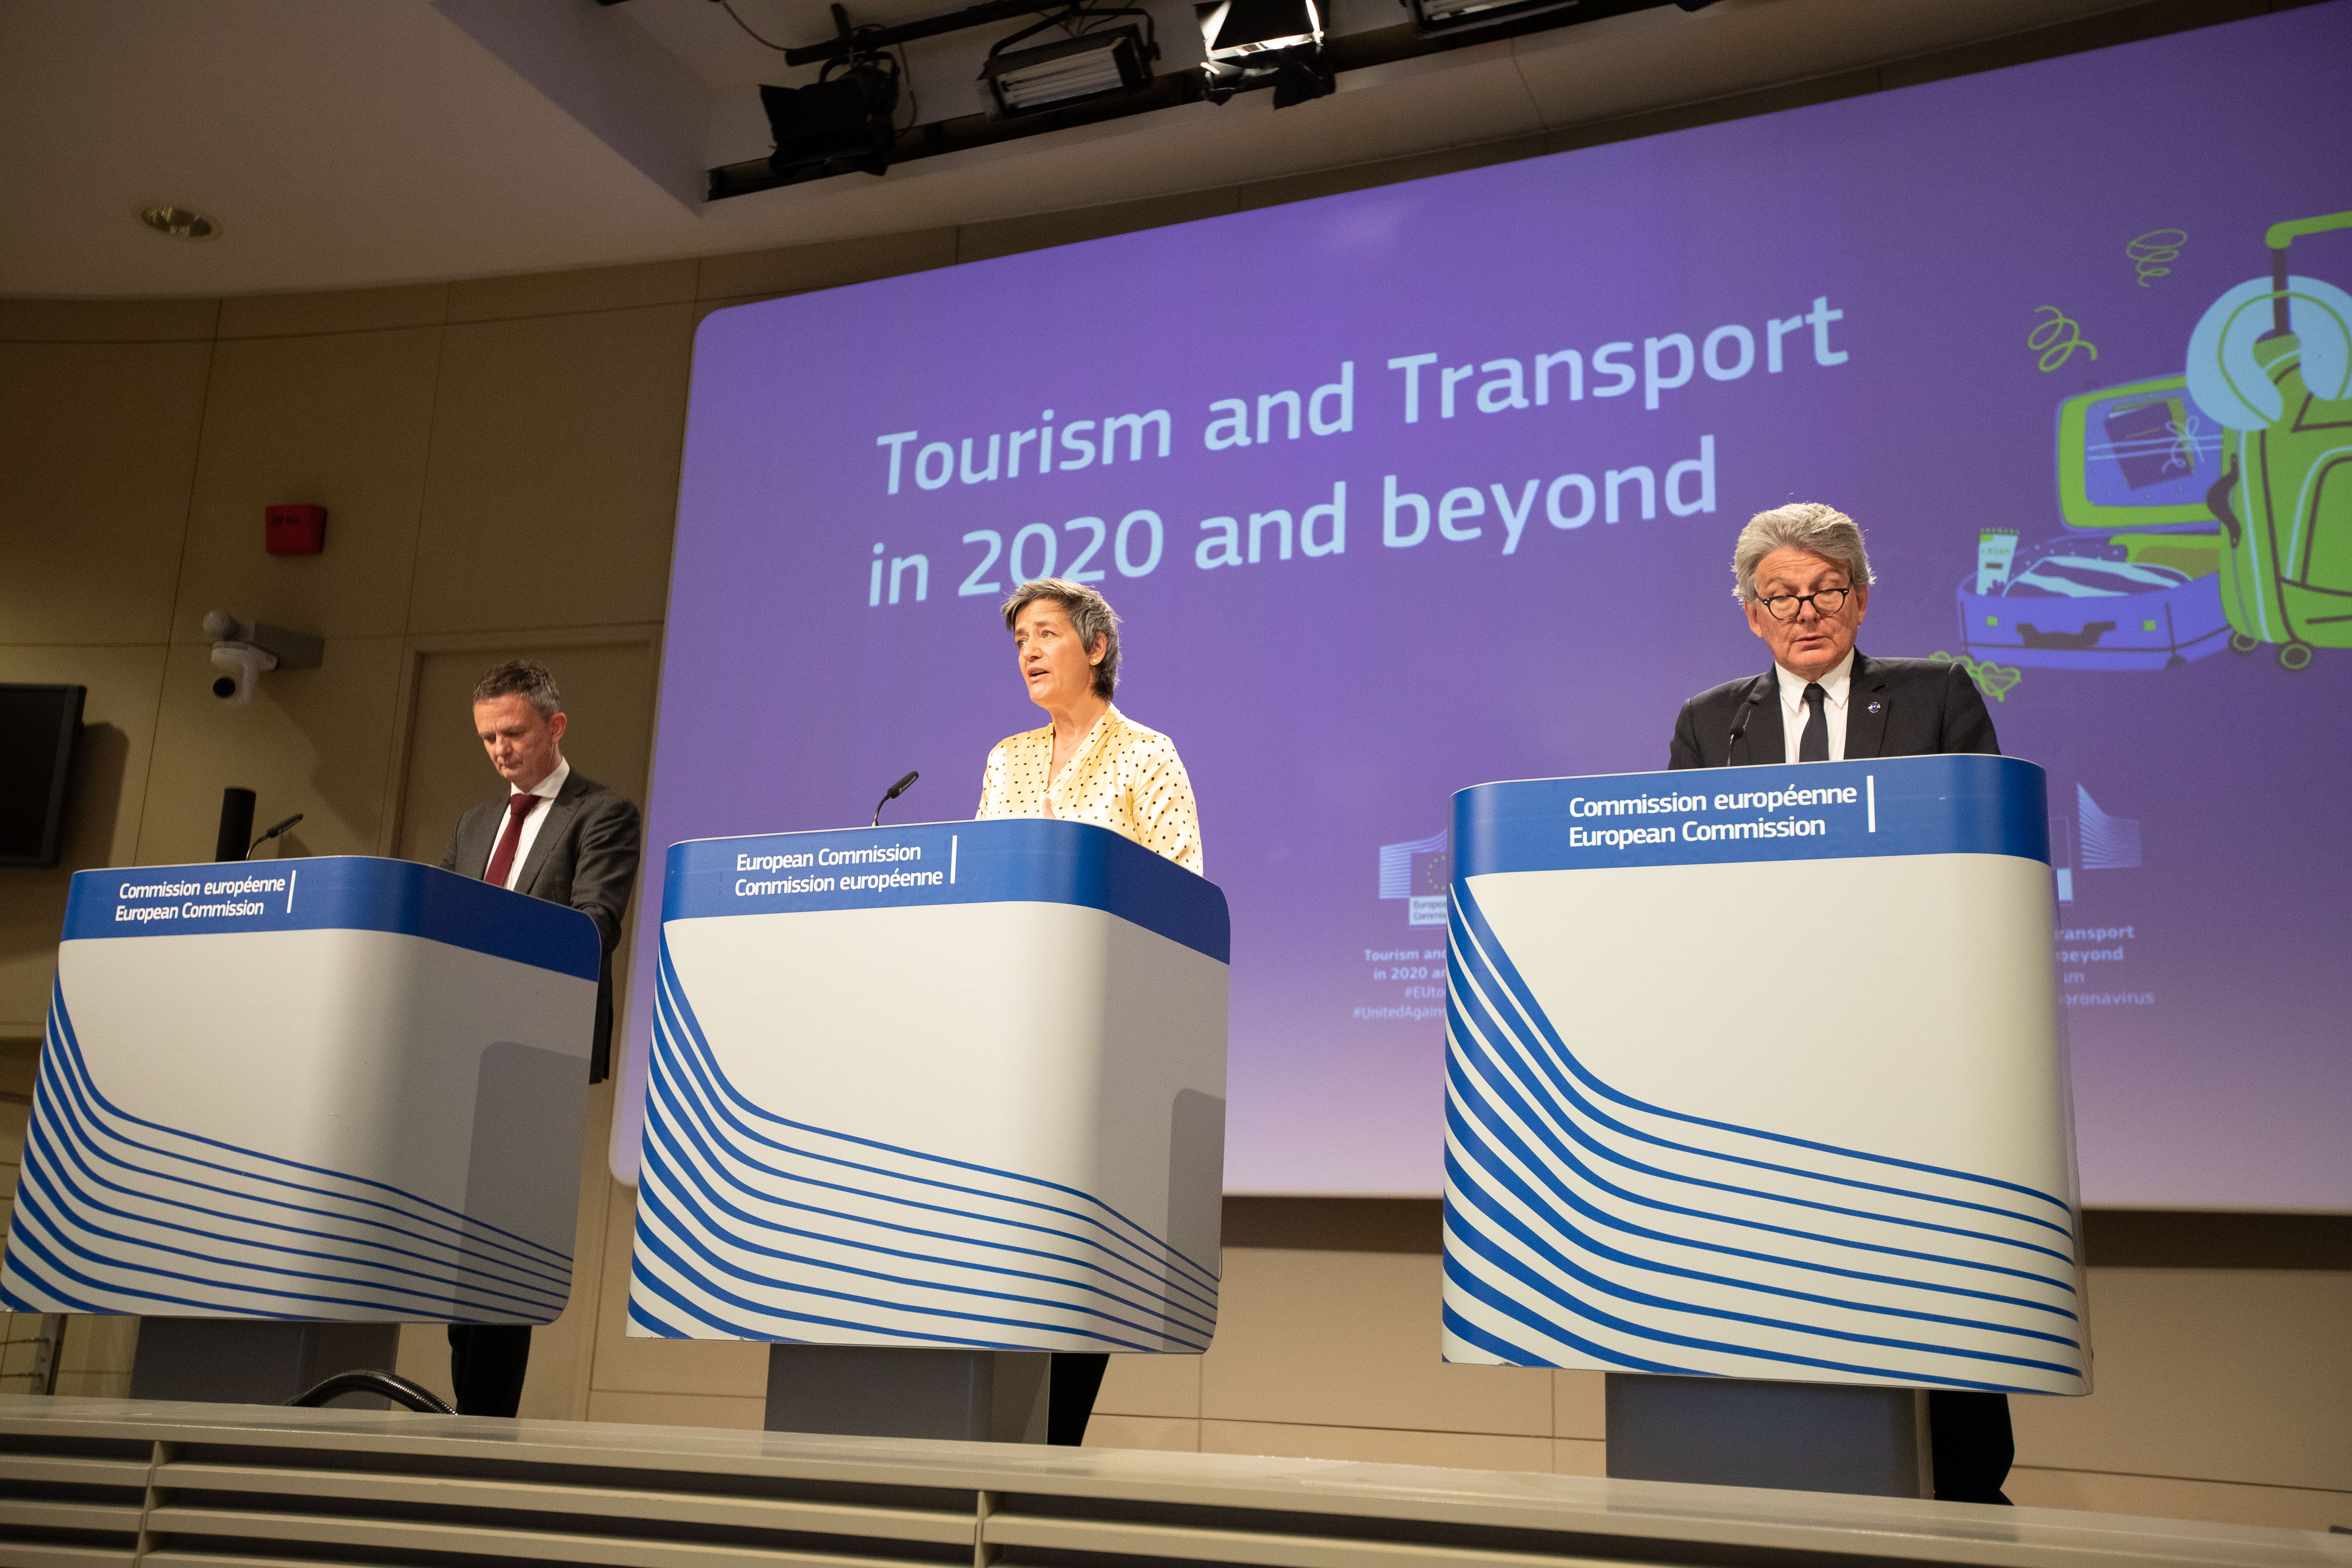 European Commission Tourism and Transport Press Conference